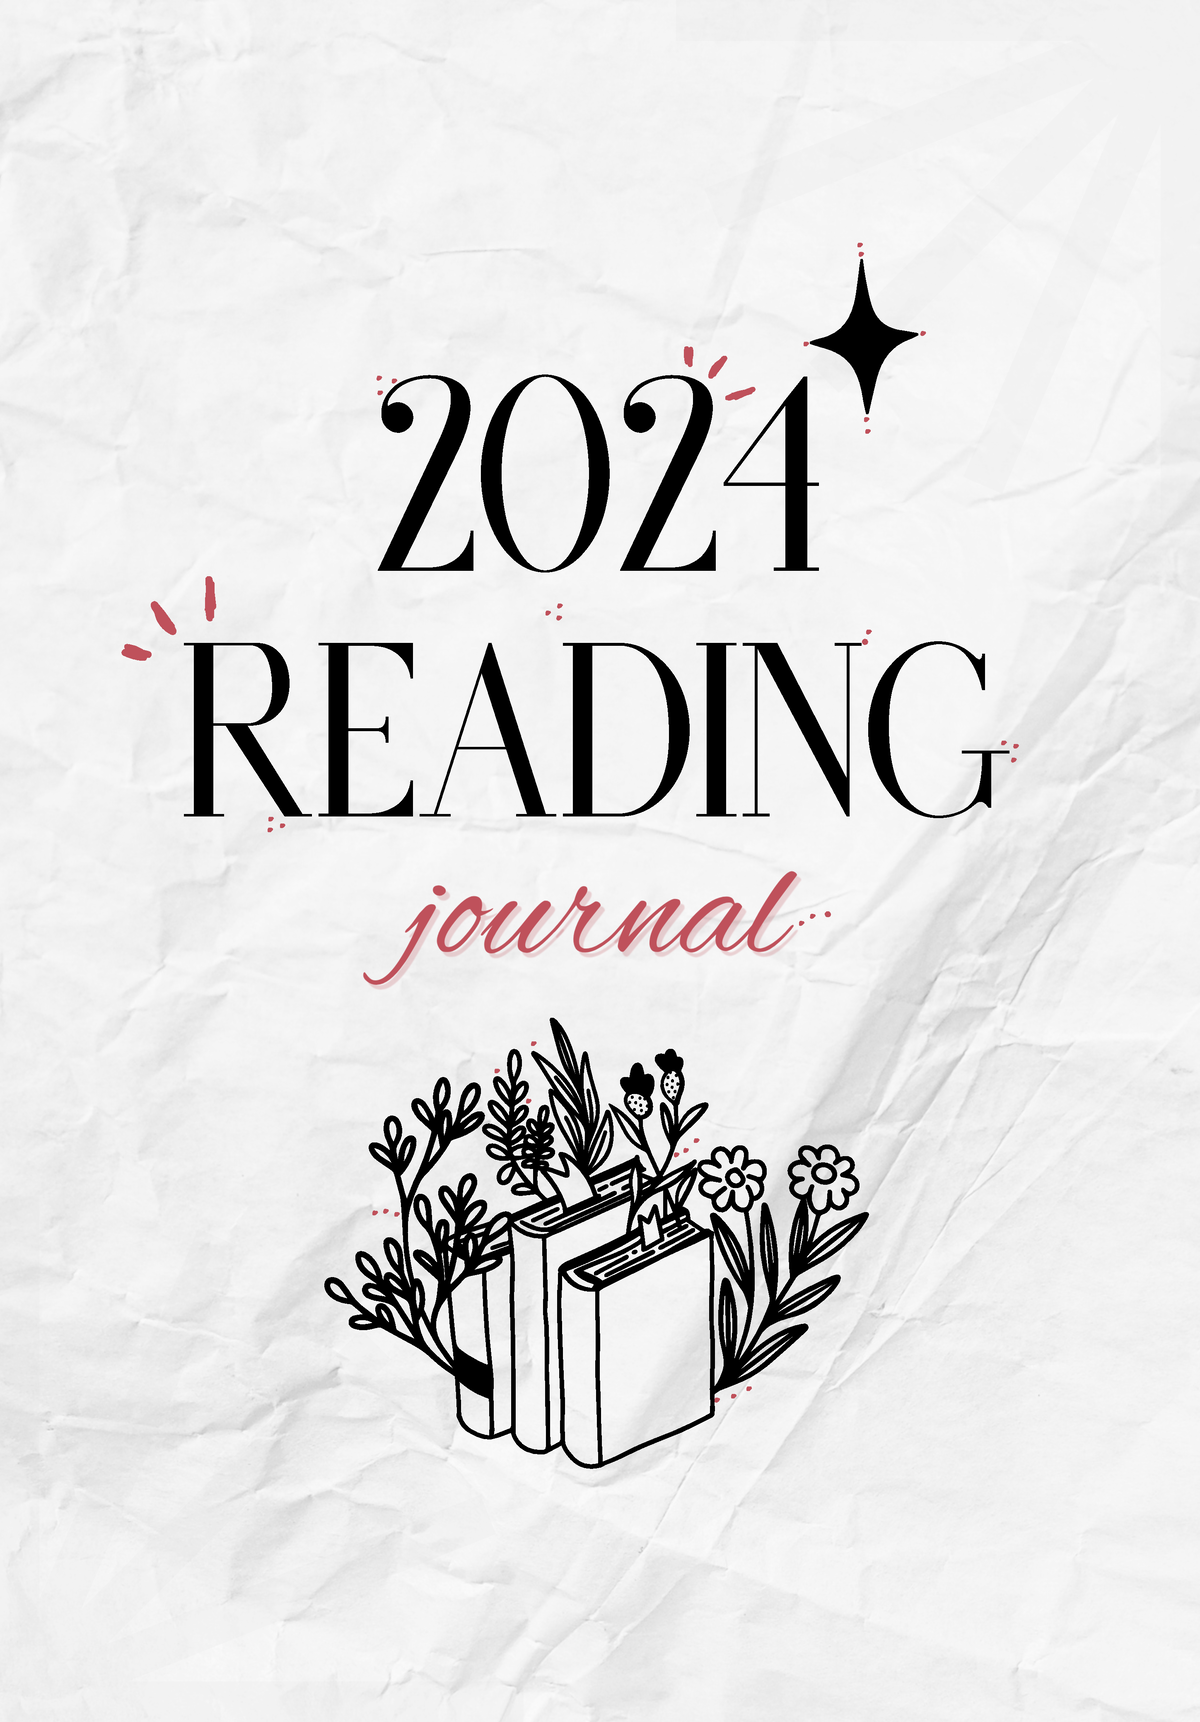 2024 Reading Journal fun 2024 READING INDEX REATING SYSTEM BOOKS I